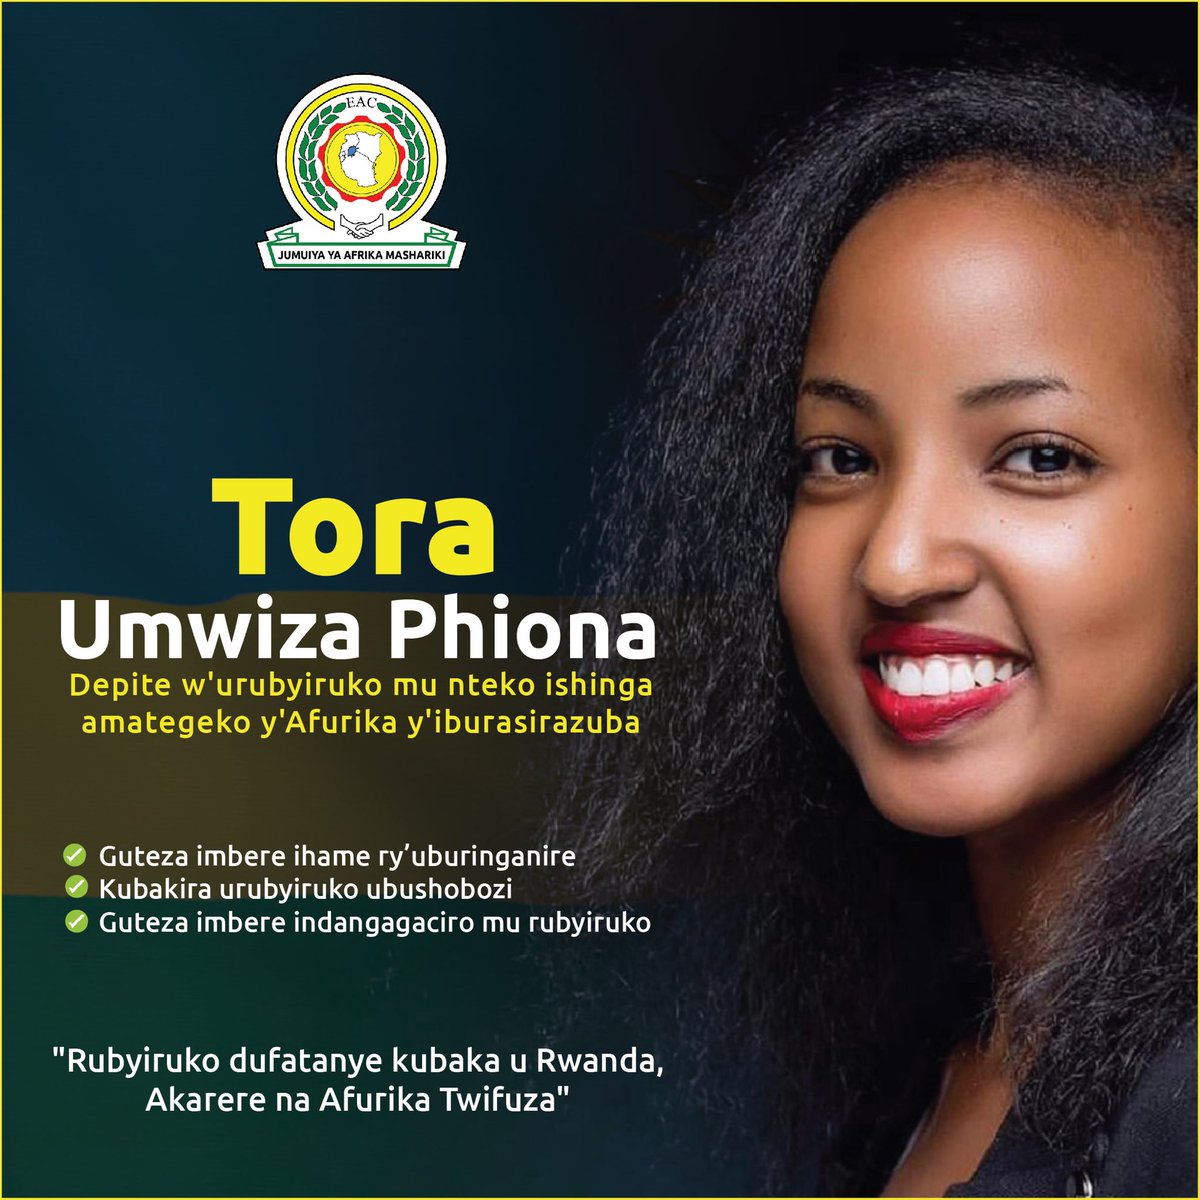 Vote for your dreams, vote for your rights, vote for me as a Rwanda Youth representative in EALA. It’s Rwanda we want, East AFRICA we log for, this is the right time to live our dreams. Kindly Share , tell a friend to tell a friend. On 5th/12/2022..        Stay blessed